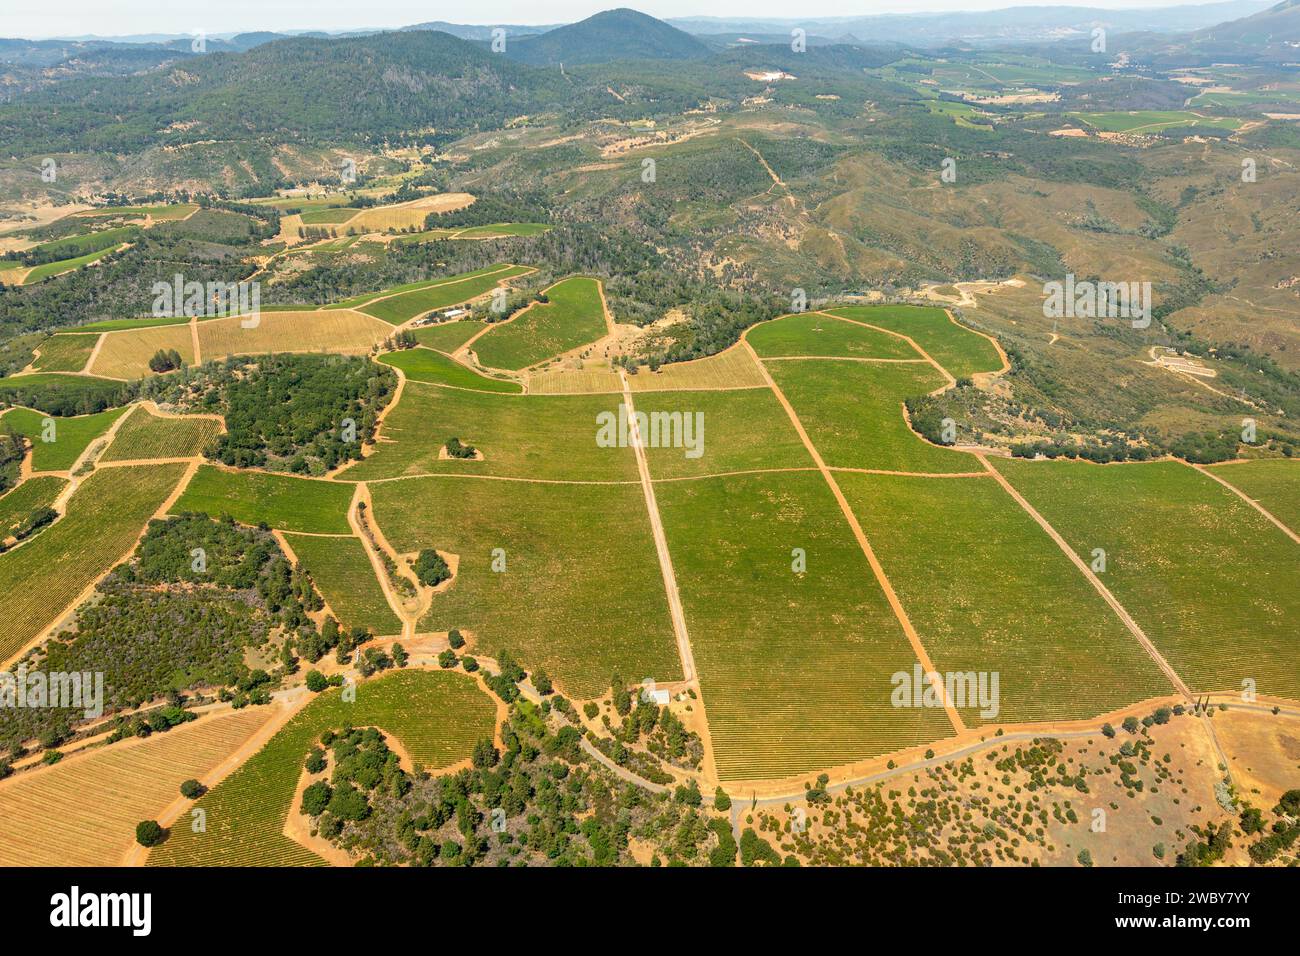 Aerial view of green rows of plants in farm fields, vineyards, and the agricultural towns of norther California Stock Photo